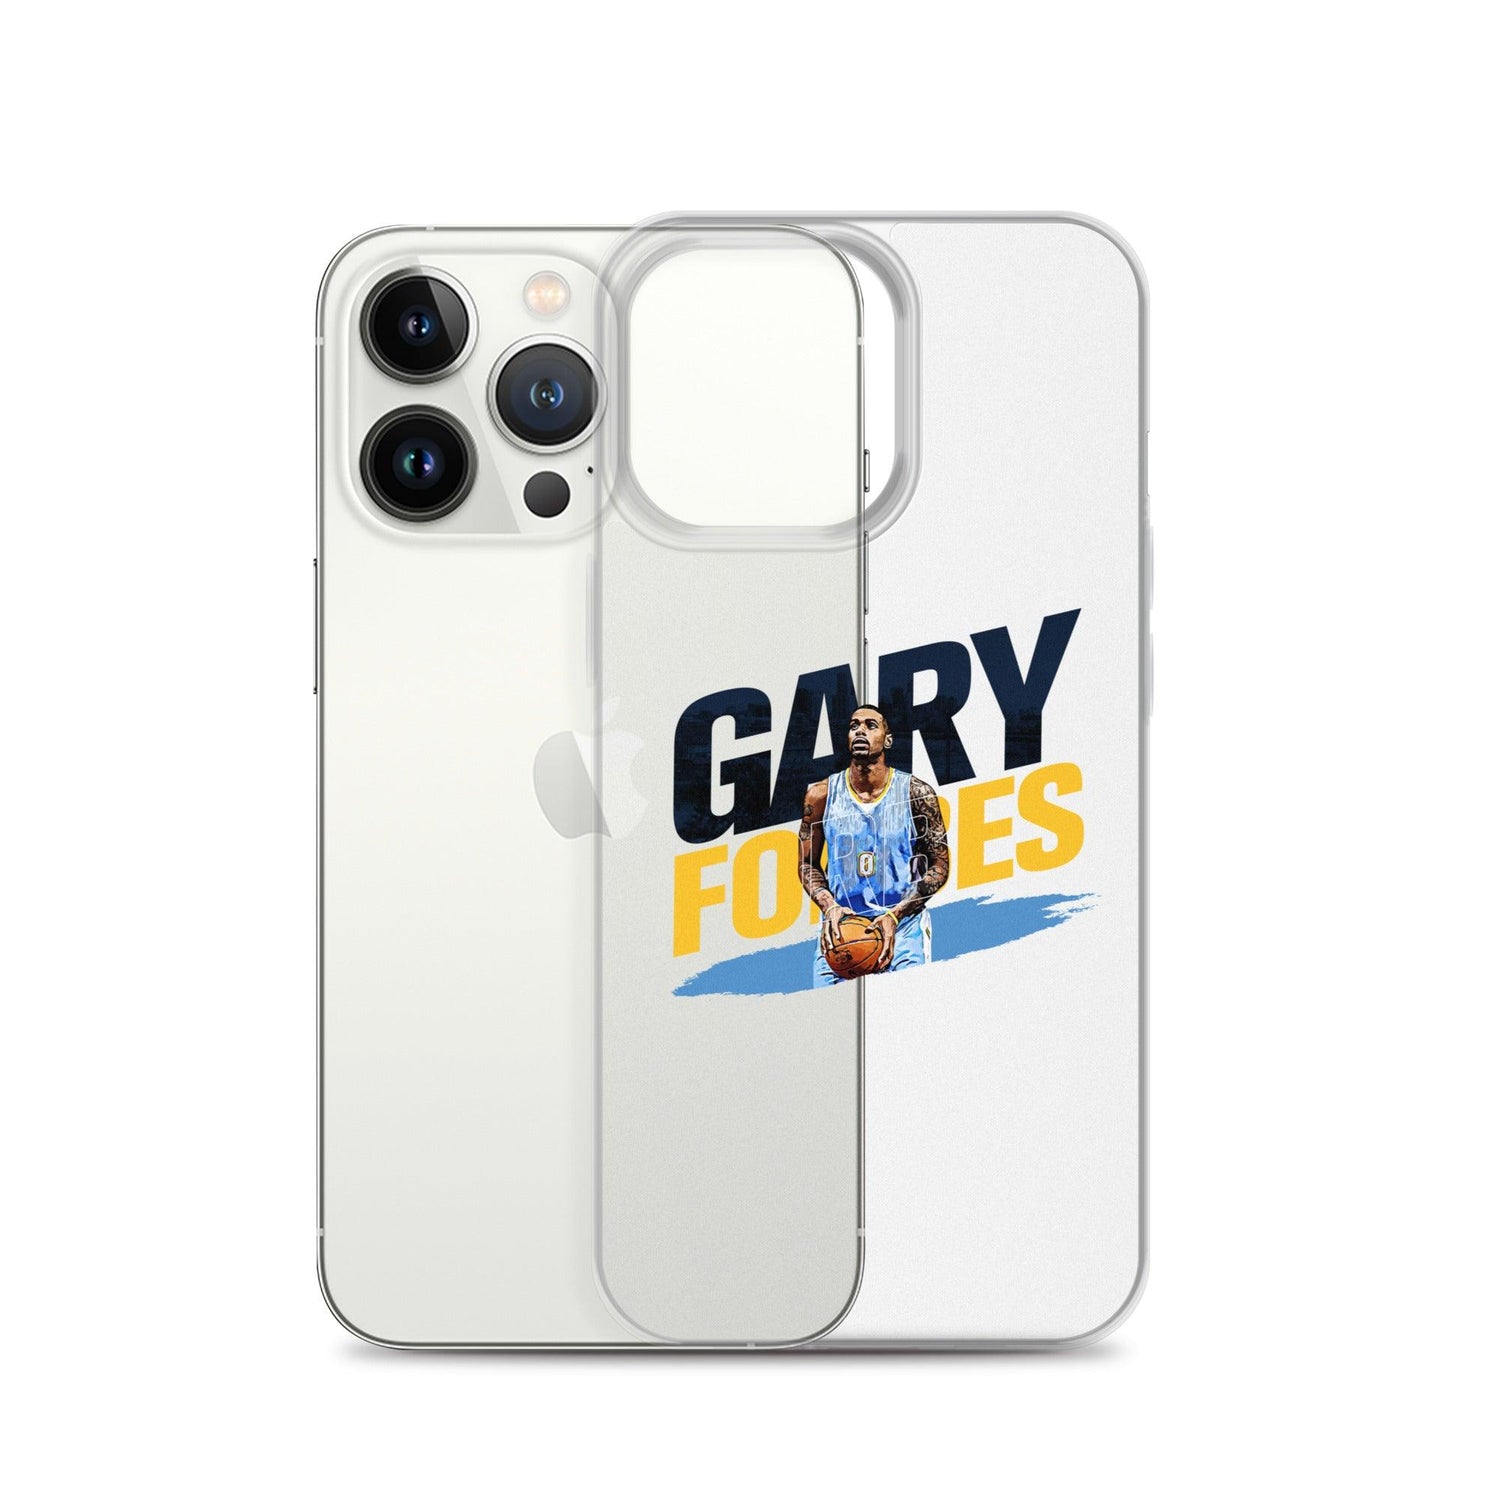 Gary Forbes "Gameday" iPhone Case - Fan Arch